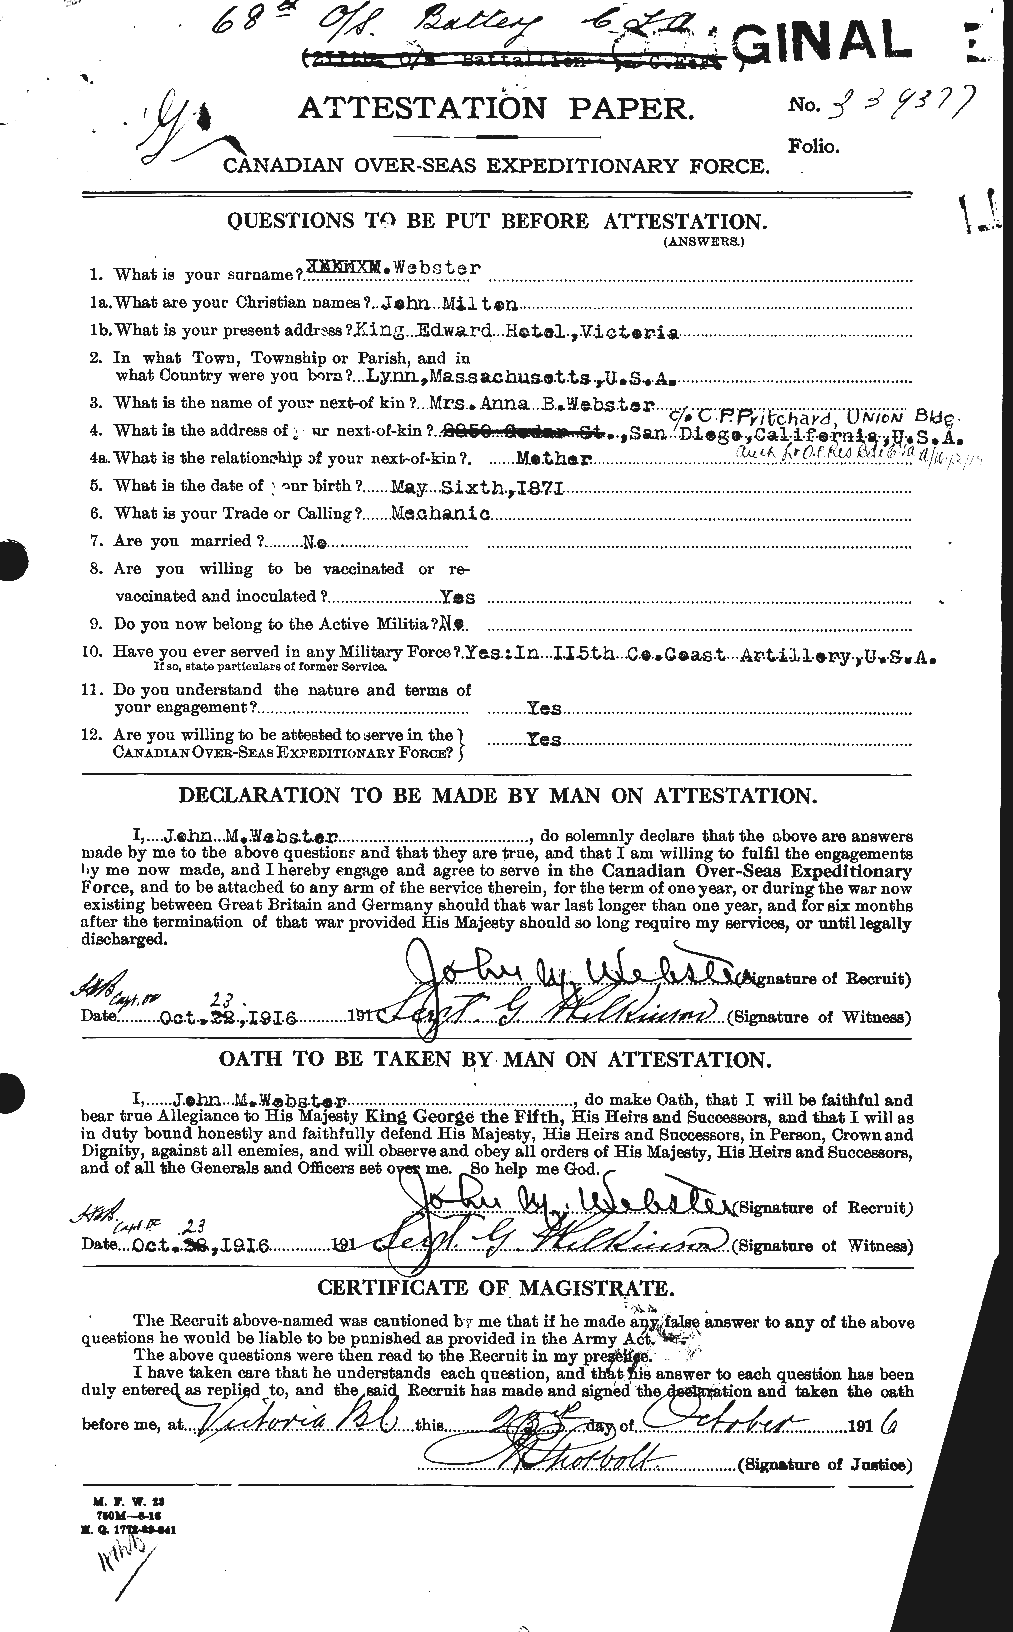 Personnel Records of the First World War - CEF 670493a